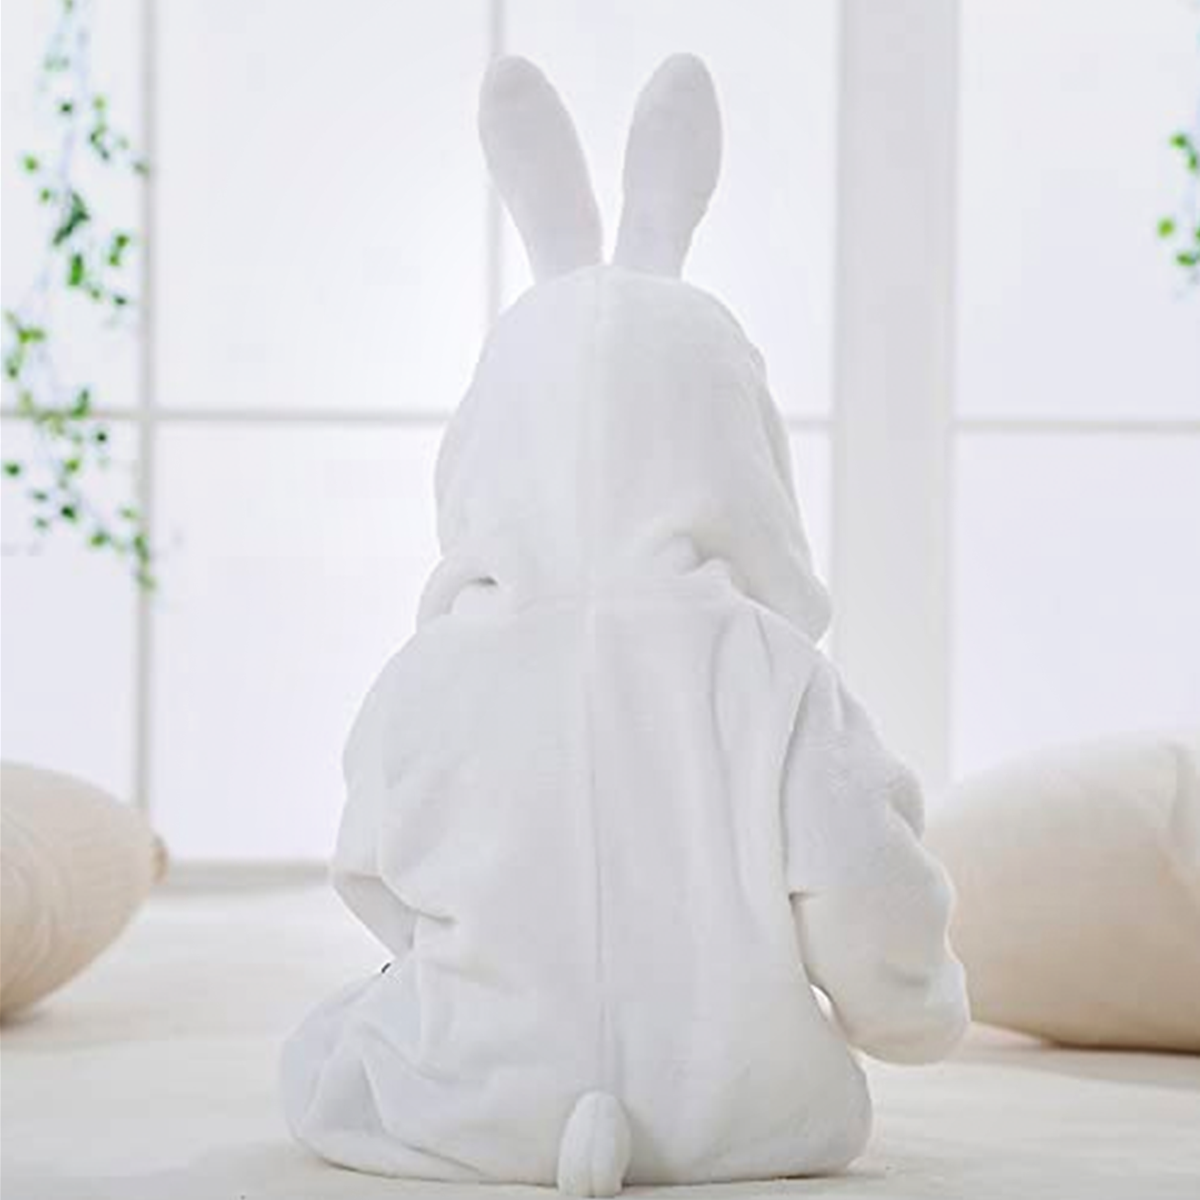 Animal Costume Toddler Winter Autumn Flannel Hooded Romper Cosplay Outfits & Jumpsuit For Unisex Baby & Kids - White Rabbit